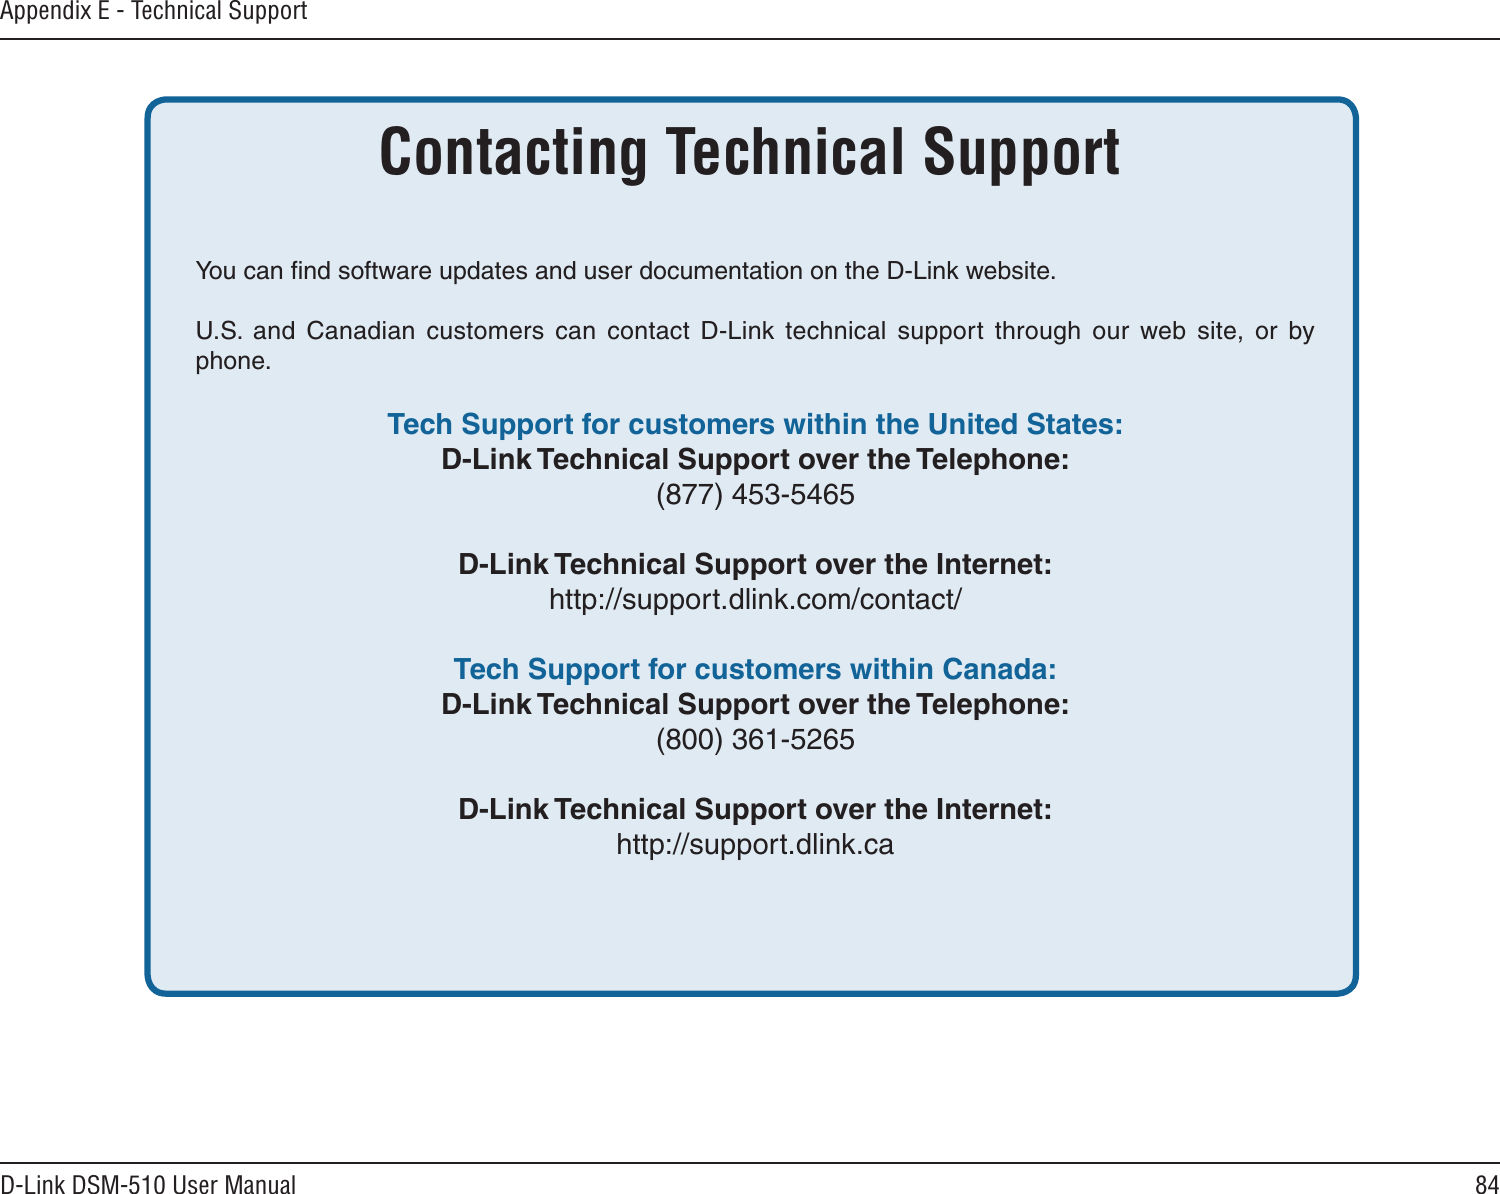 84D-Link DSM-510 User ManualAppendix E - Technical SupportYou can ﬁnd software updates and user documentation on the D-Link website.U.S.  and  Canadian  customers  can  contact  D-Link  technical  support  through  our  web  site,  or  by phone.  Tech Support for customers within the United States: D-Link Technical Support over the Telephone:  (877) 453-5465  D-Link Technical Support over the Internet:  http://support.dlink.com/contact/ Tech Support for customers within Canada: D-Link Technical Support over the Telephone:  (800) 361-5265    D-Link Technical Support over the Internet:  http://support.dlink.caContacting Technical Support